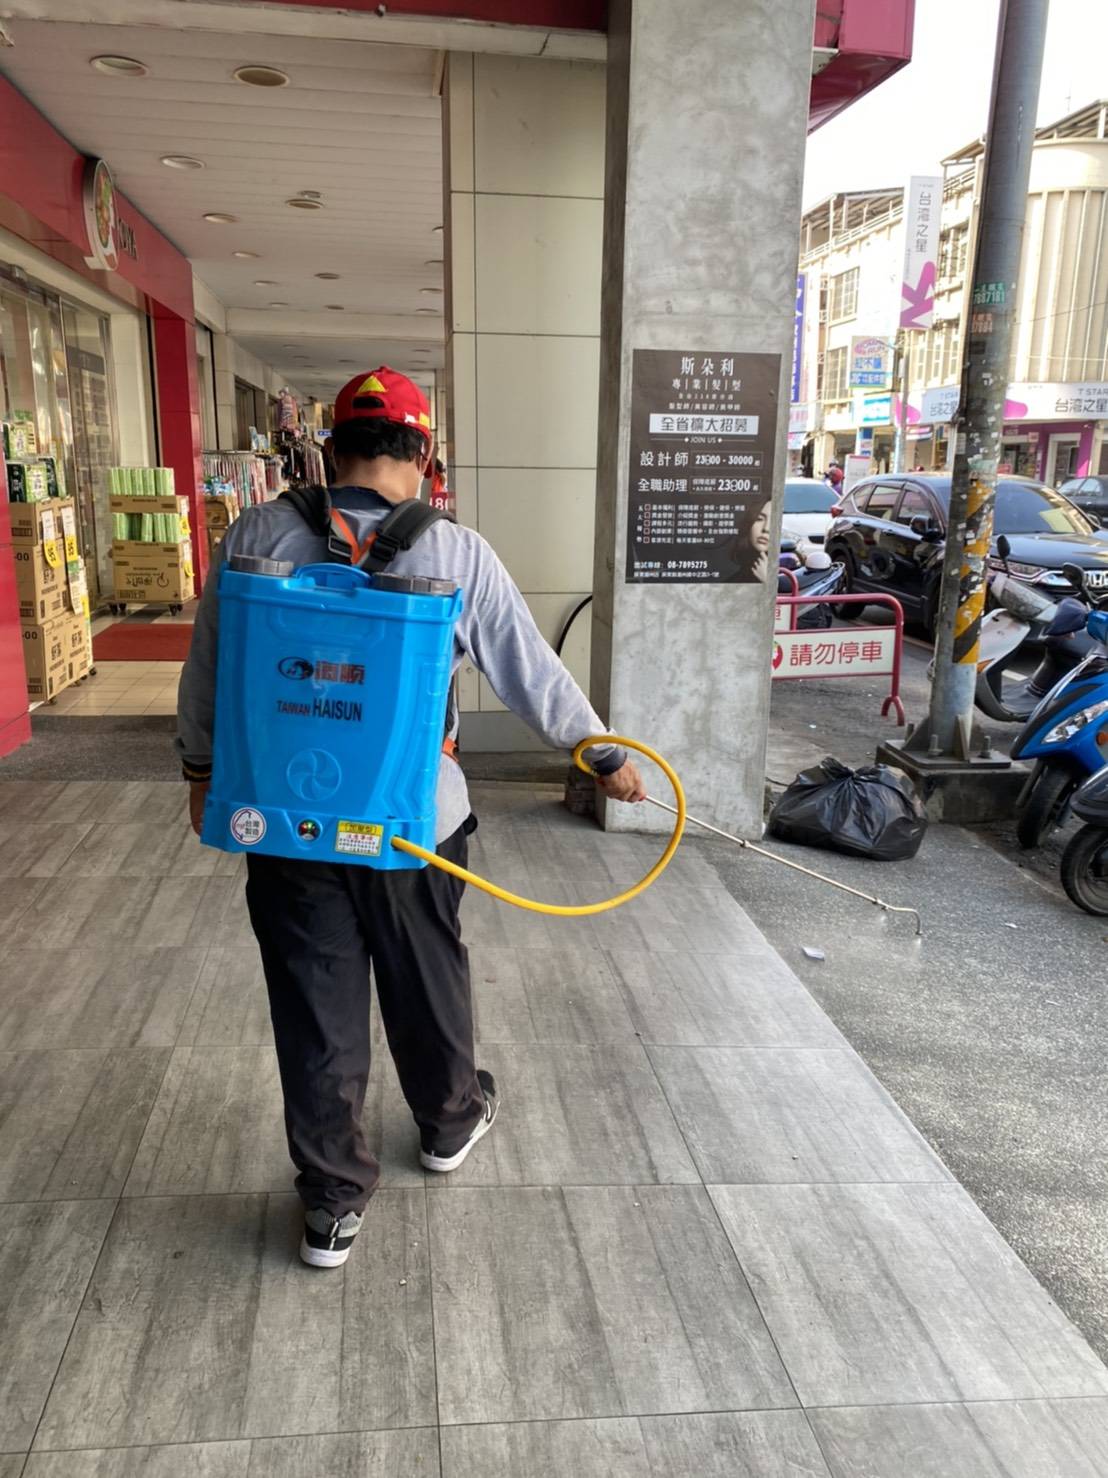 Disinfection was undertaken outside a store. Source: Environmental Protection Administration 